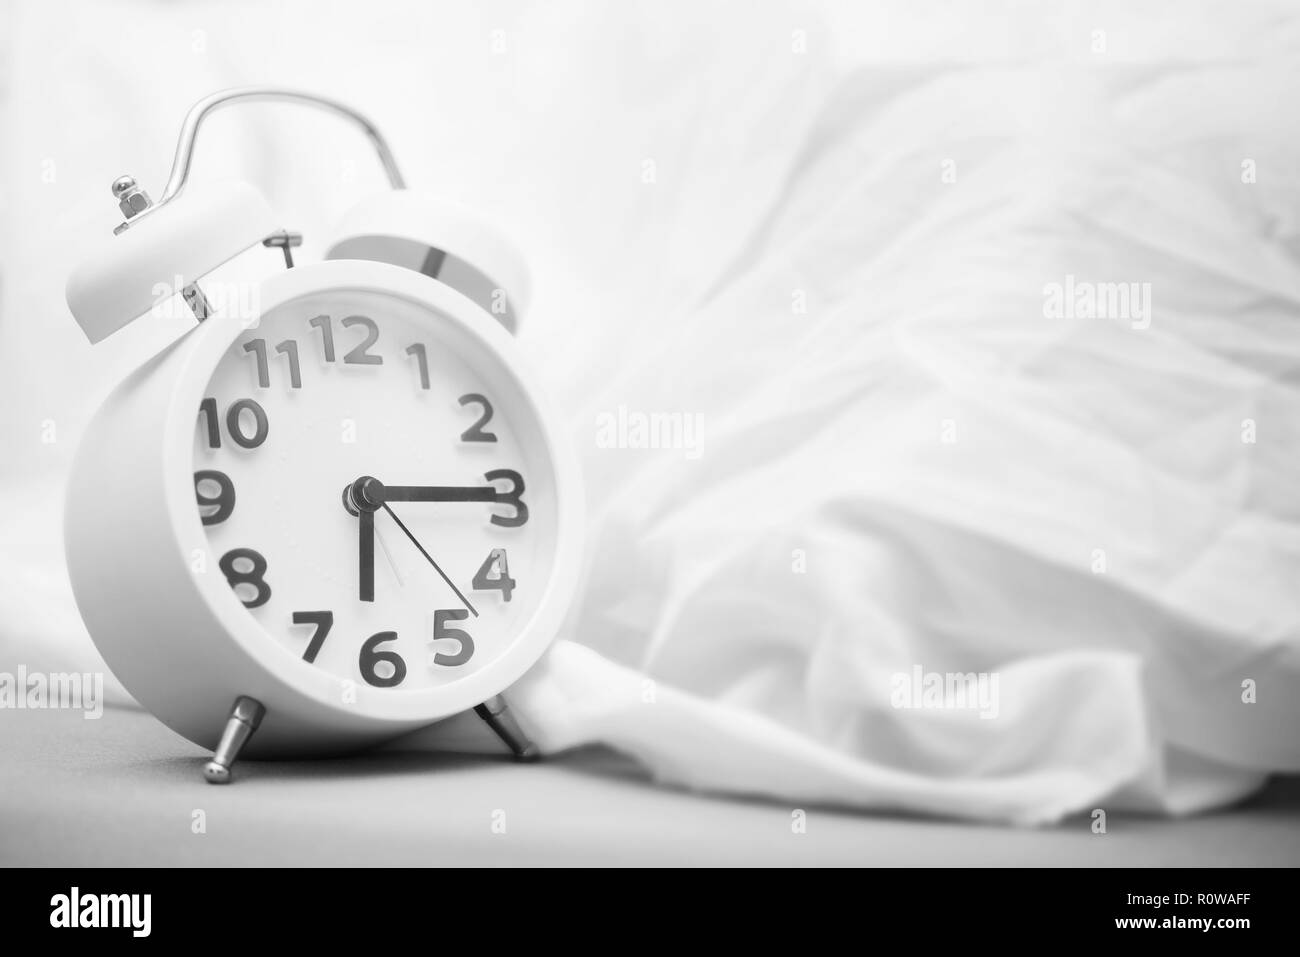 Time background concept. Alarm clock on bed, wake up in the morning. Picture for add text message. Backdrop for design art work. Stock Photo